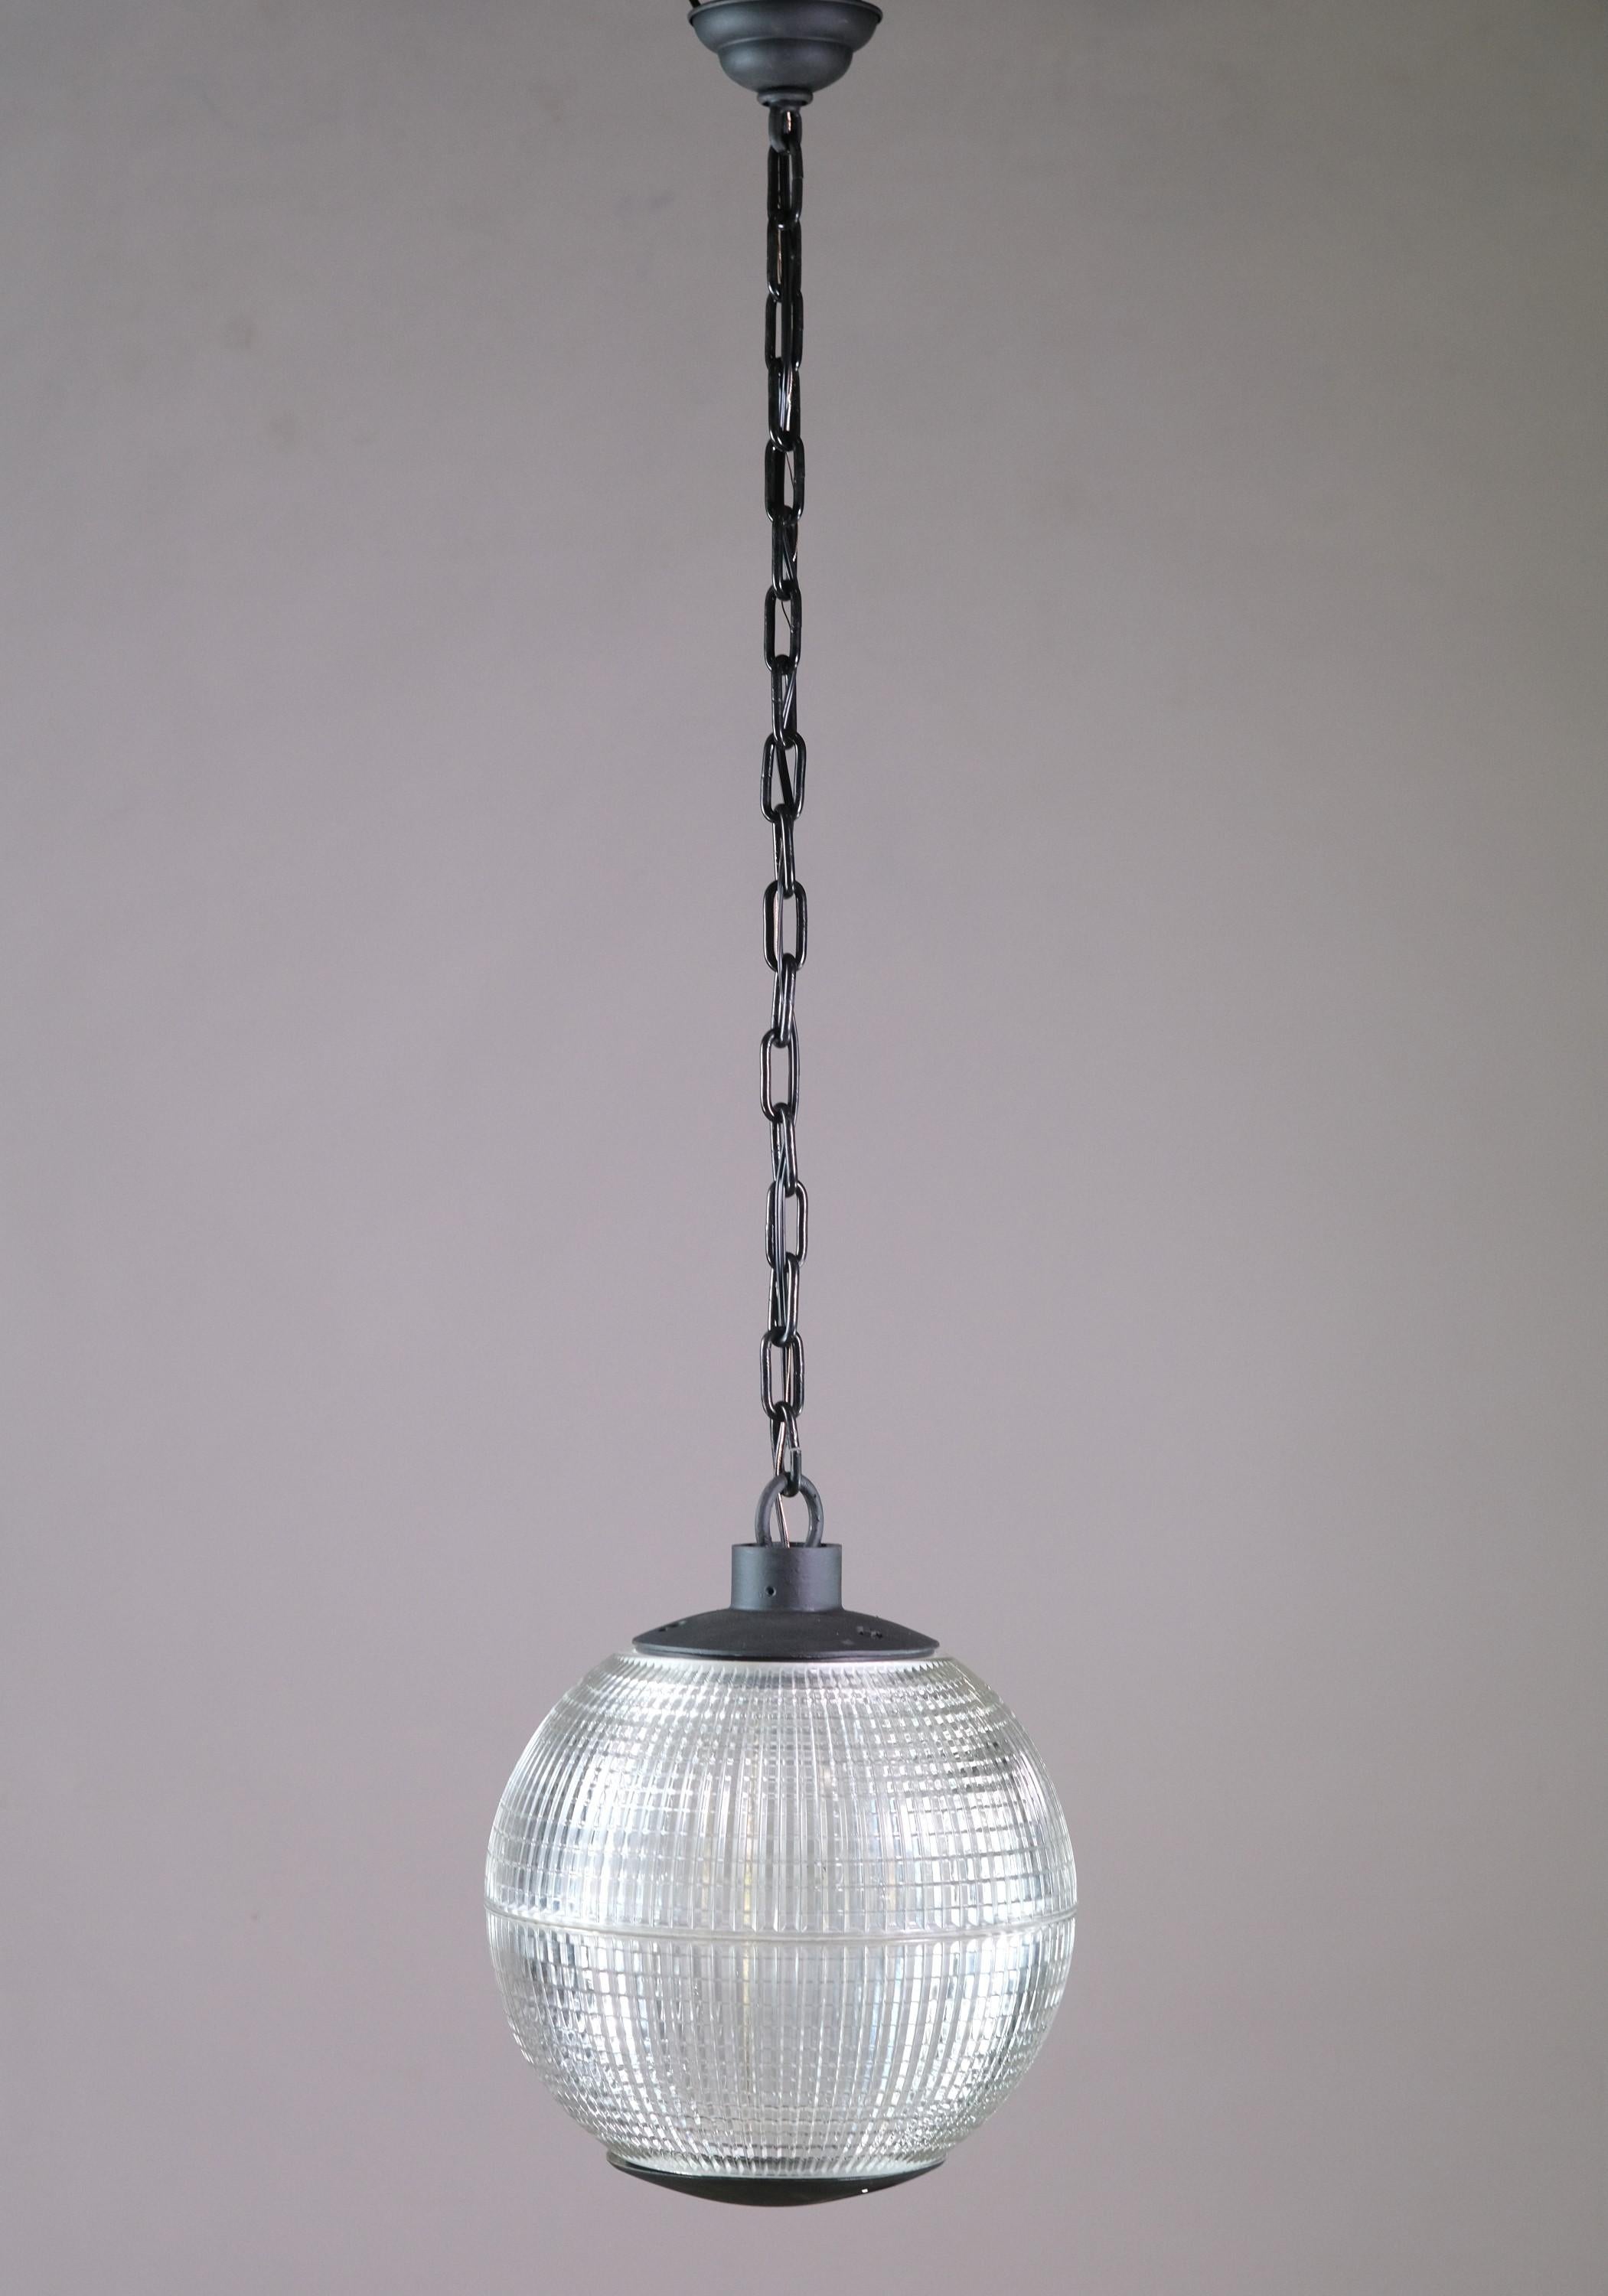 1960s French streetlights from the Normandy Province. Made with the original borosilicate glass shade. Cleaned and rewired to US standards with new chain and hardware. The price includes cleaning and wiring. Measure: 16 in. Small quantity available